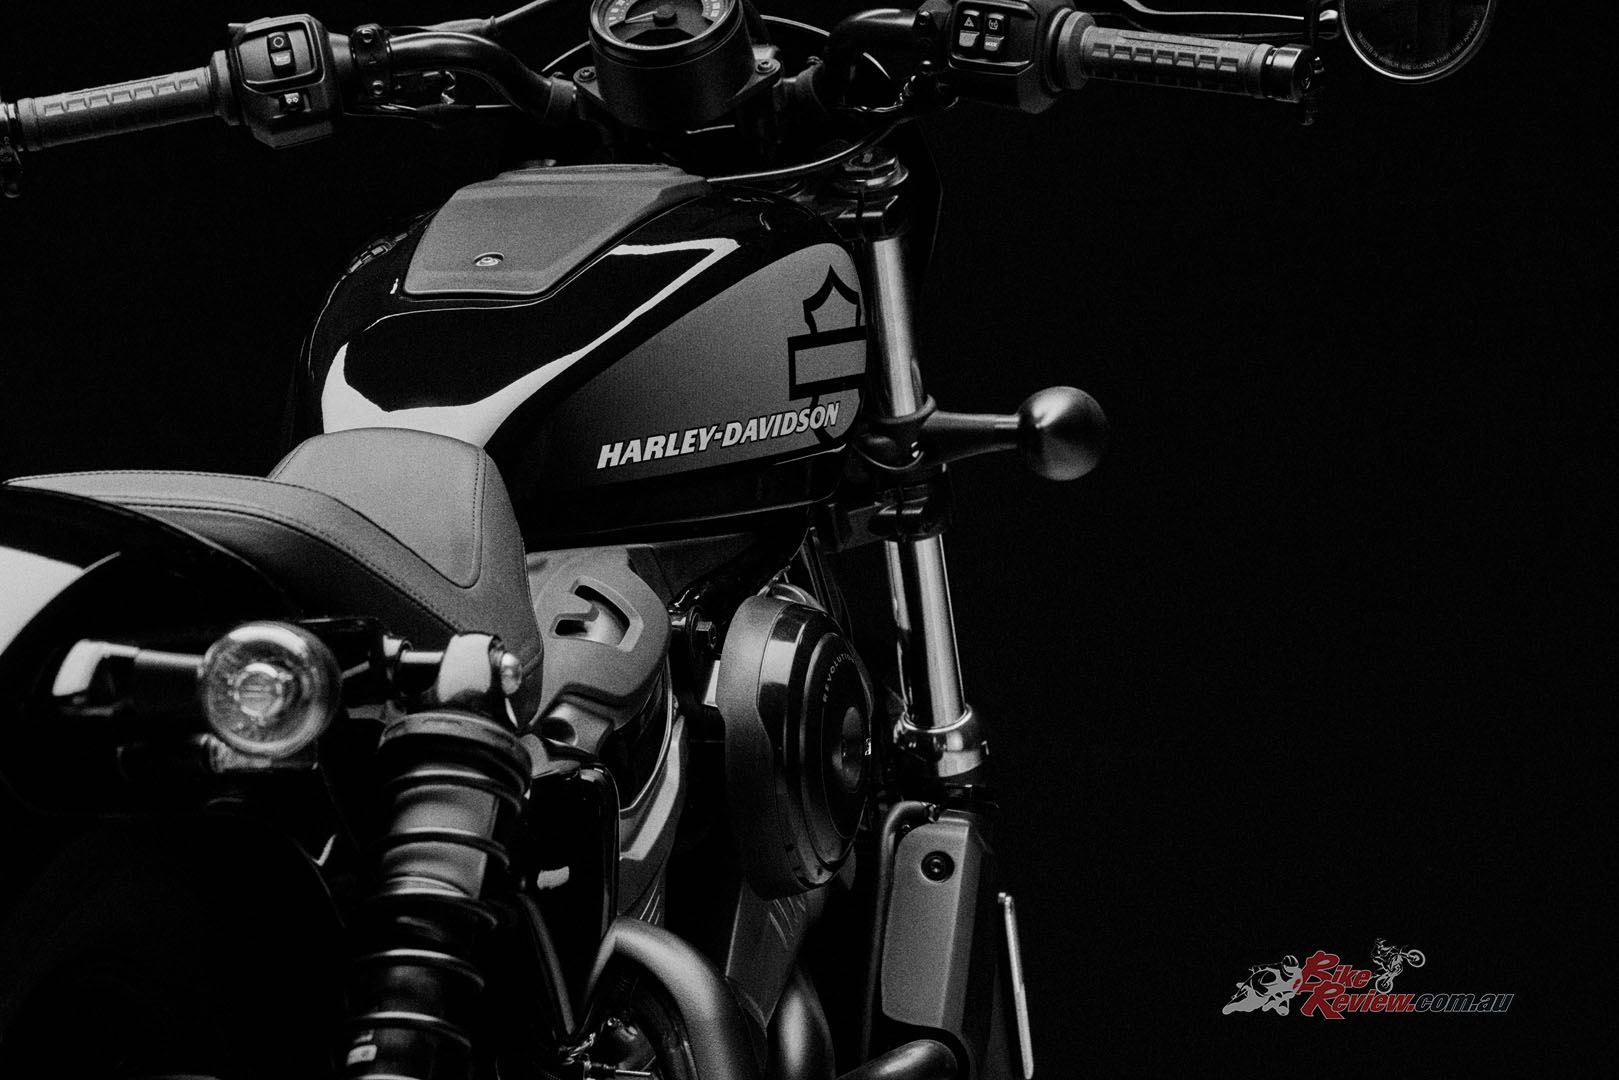 Harley-Davison Genuine Motor Parts & Accessories has created a range of accessories for the  Nightster, designed to enhance fit, comfort and style. 